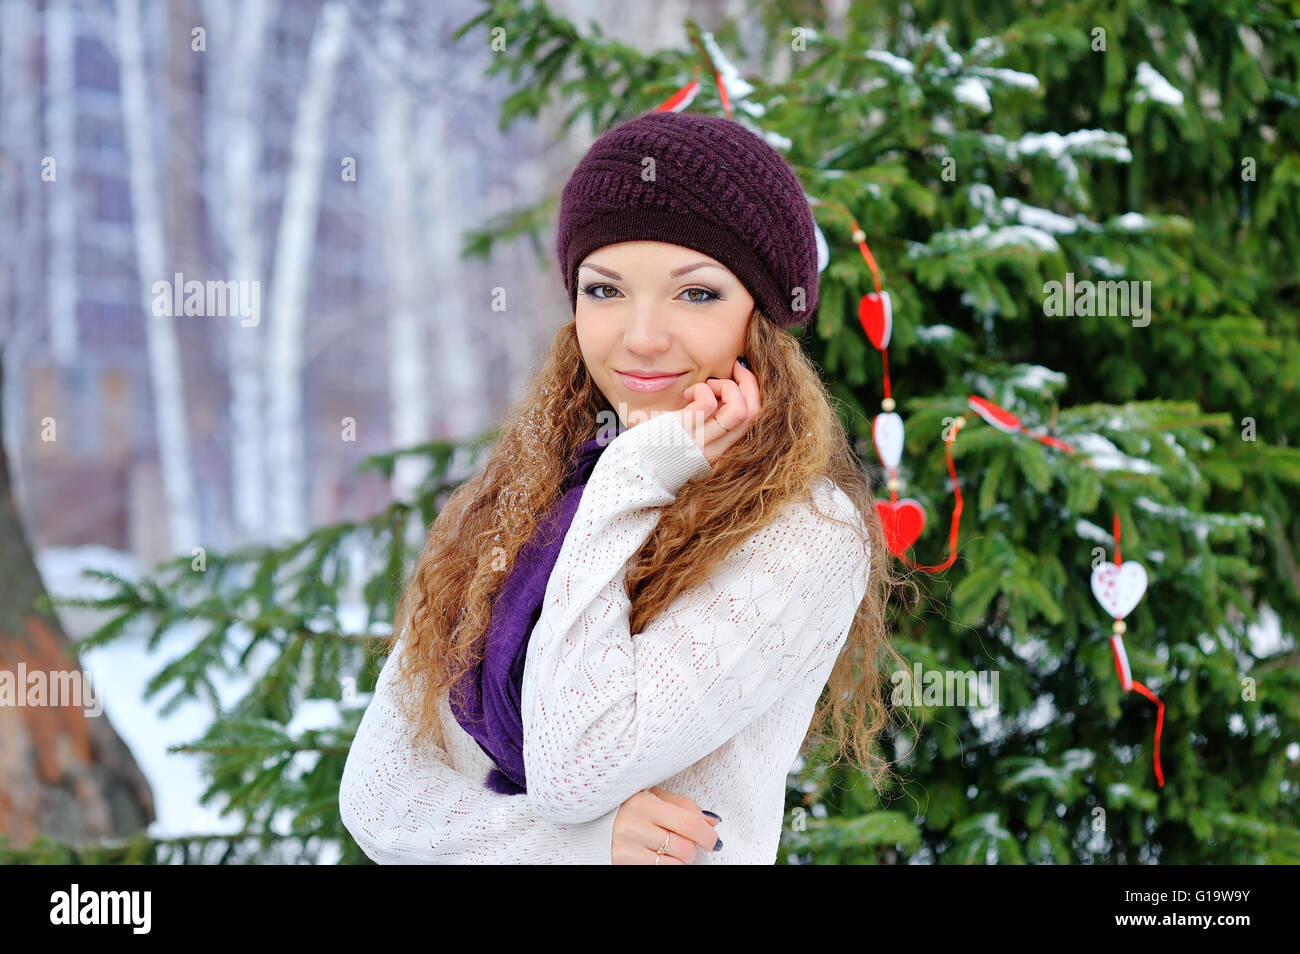 beautiful girl in winter on a background of trees Stock Photo